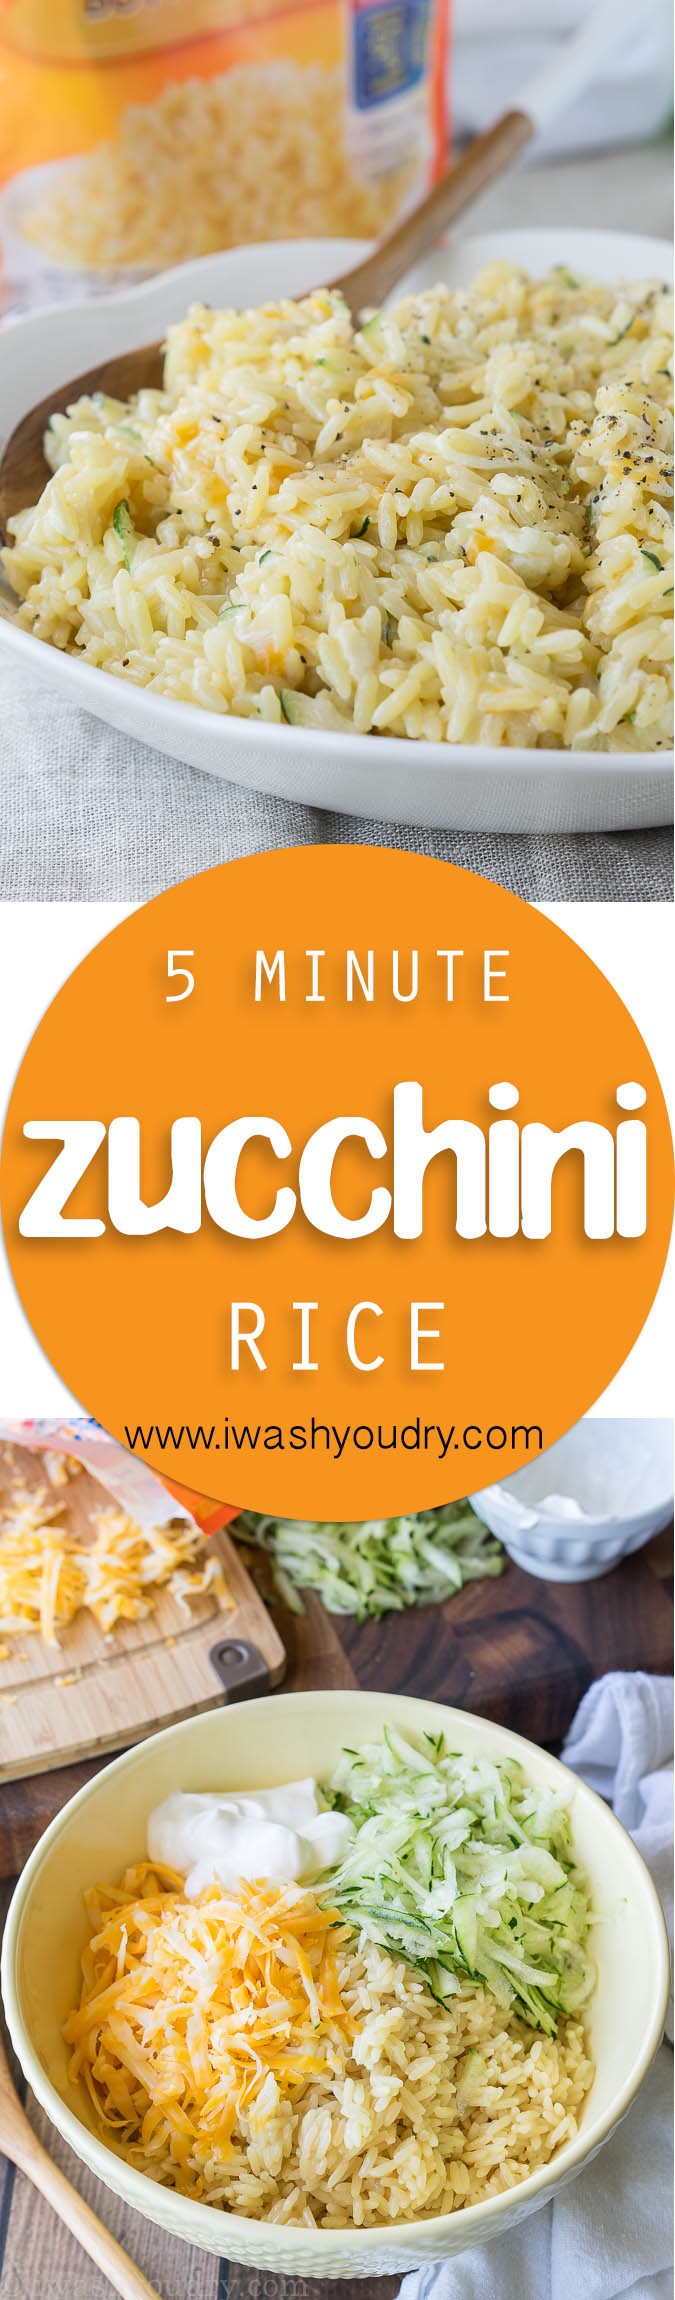 I love making this 5 minute Cheesy Zucchini Rice recipe for a quick and easy side dish! Even my kids get in there and help too!